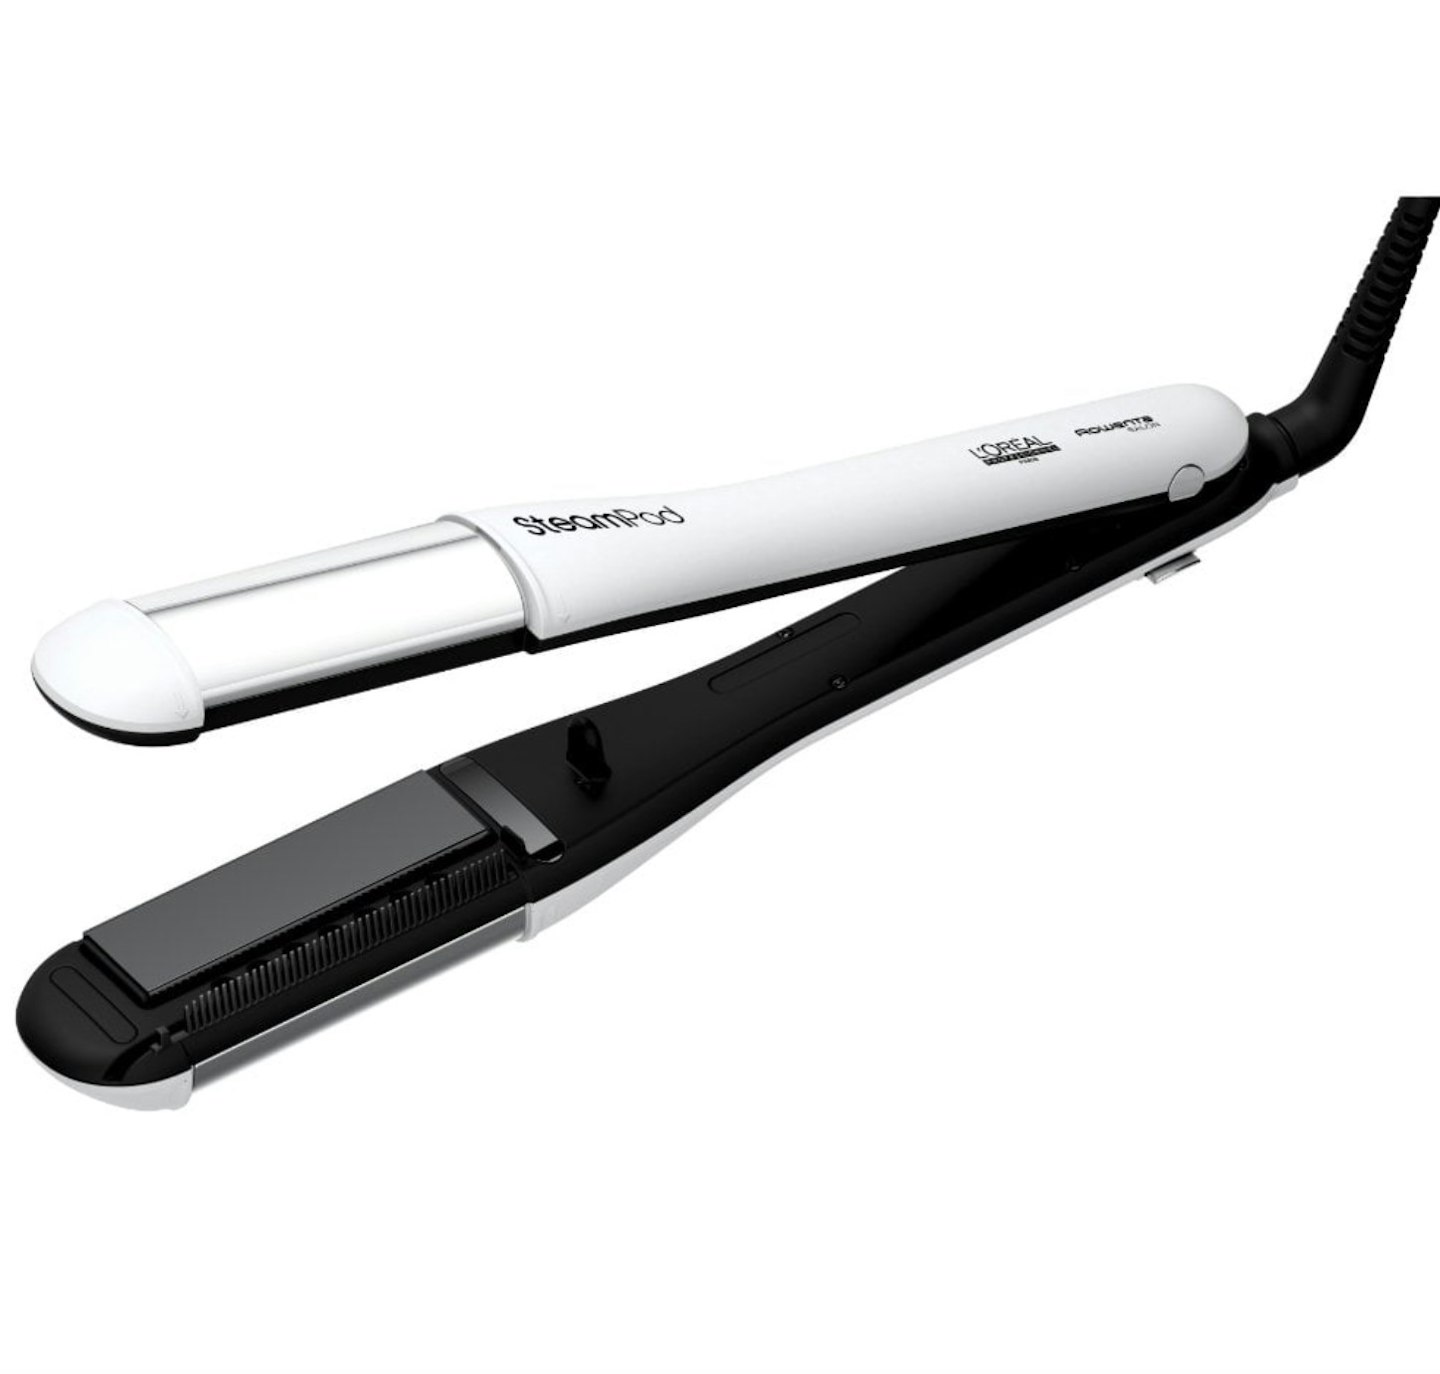 L'Oreal SteamPod 4.0 Hair Straightener and Styling Tool